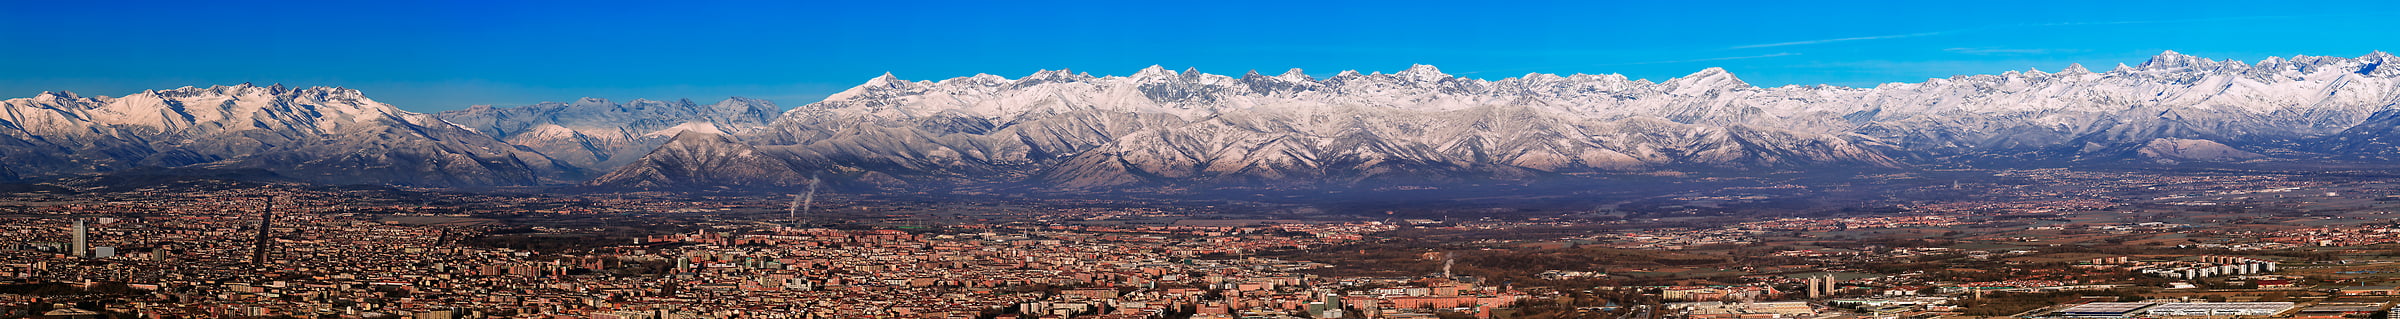 265 megapixels! A very high resolution, panorama photo of Turin, Italy; landscape photograph created by Duilio Fiorille from Basilica of Superga over Turin, Piedmont, Italy